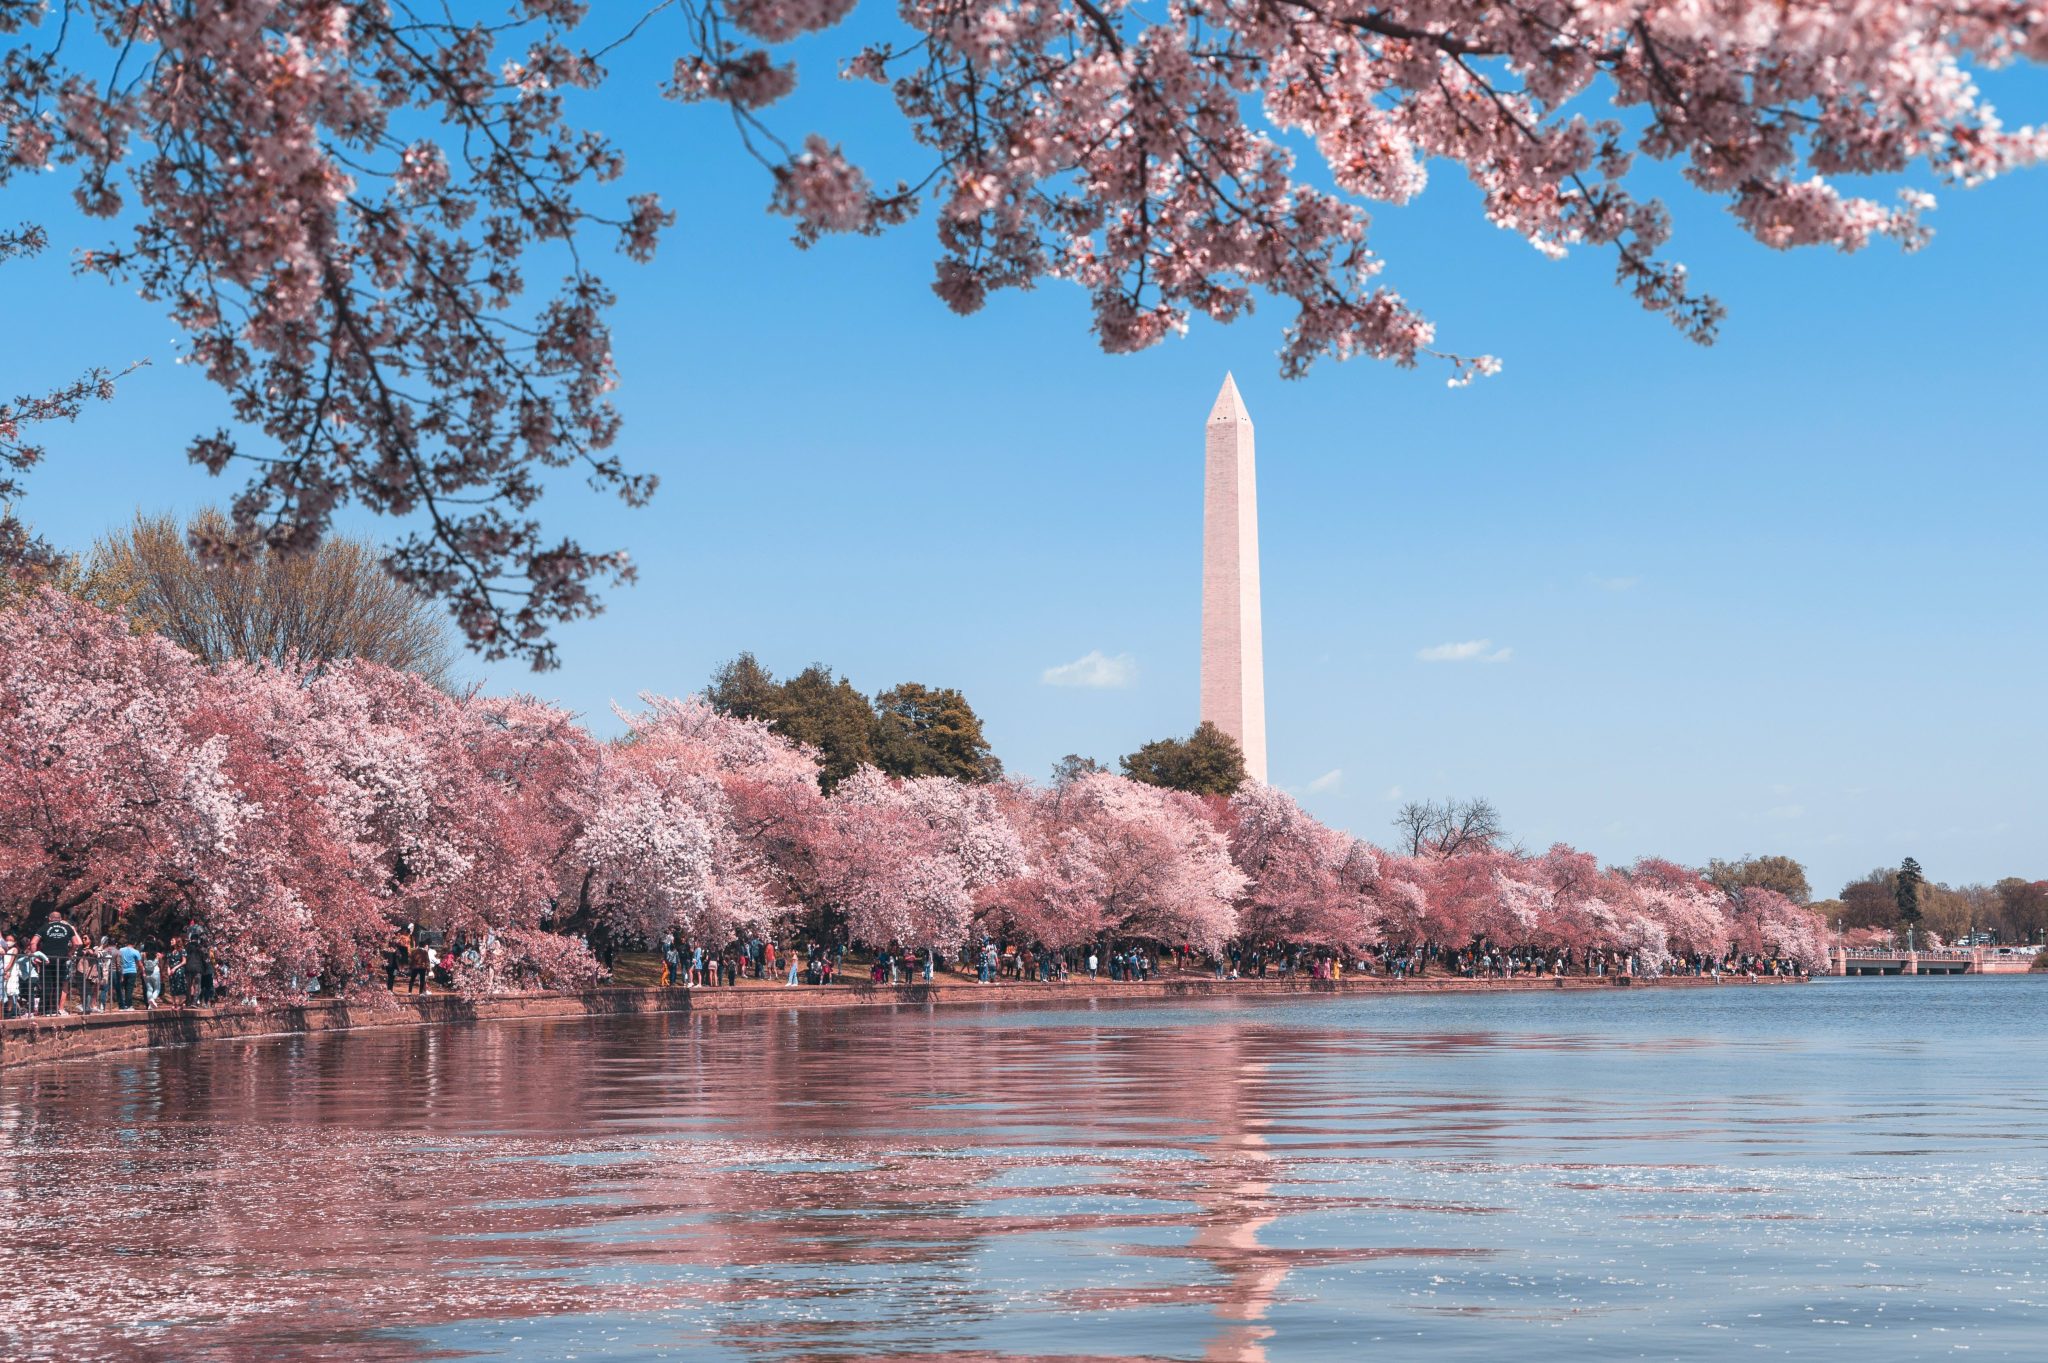 Cherry Blossoms in bloom near the Washington Monument